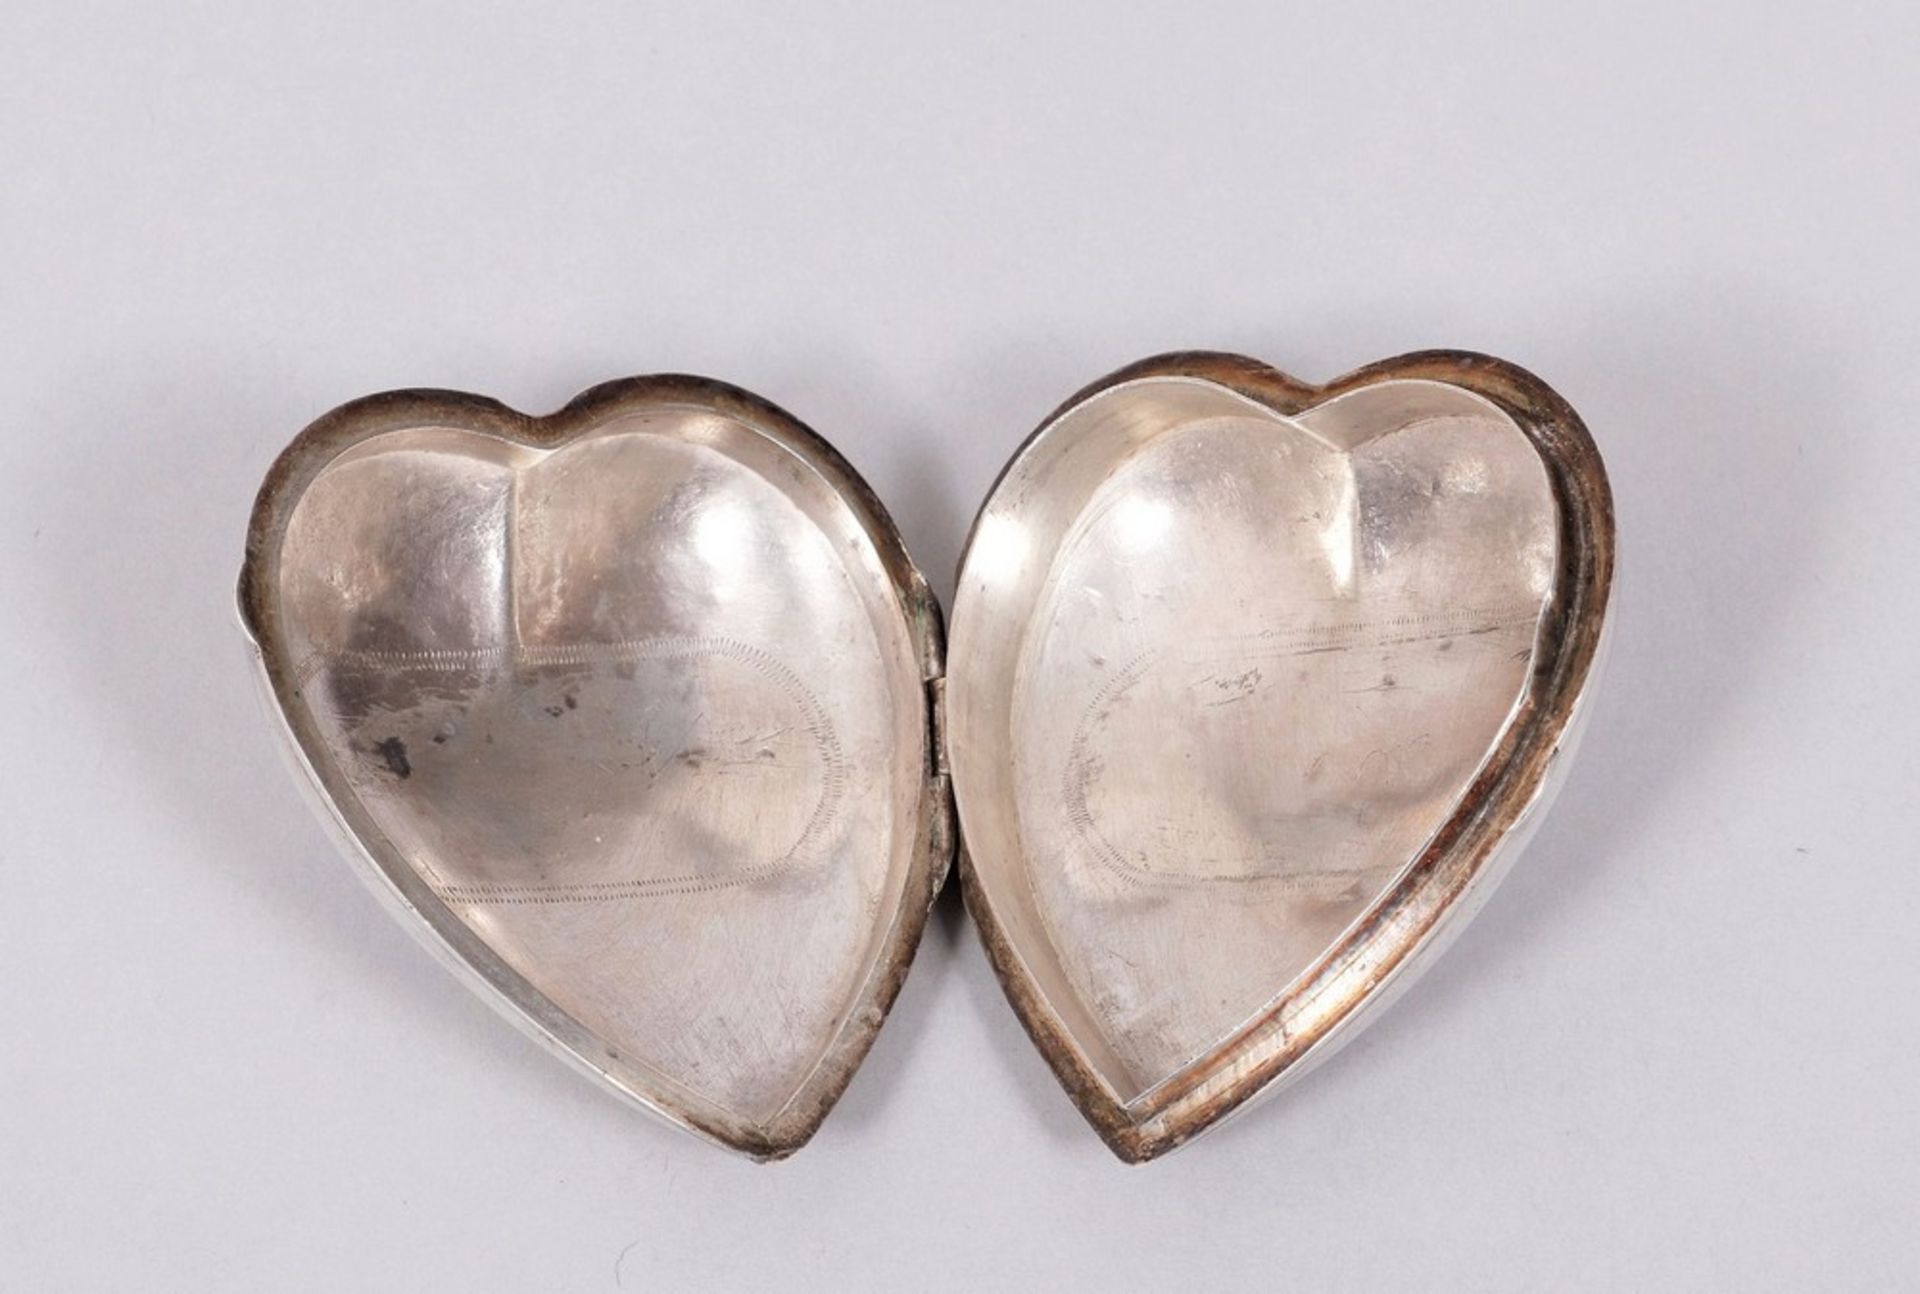 Small heart box, 925 silver, probably German, 18th C. - Image 3 of 3